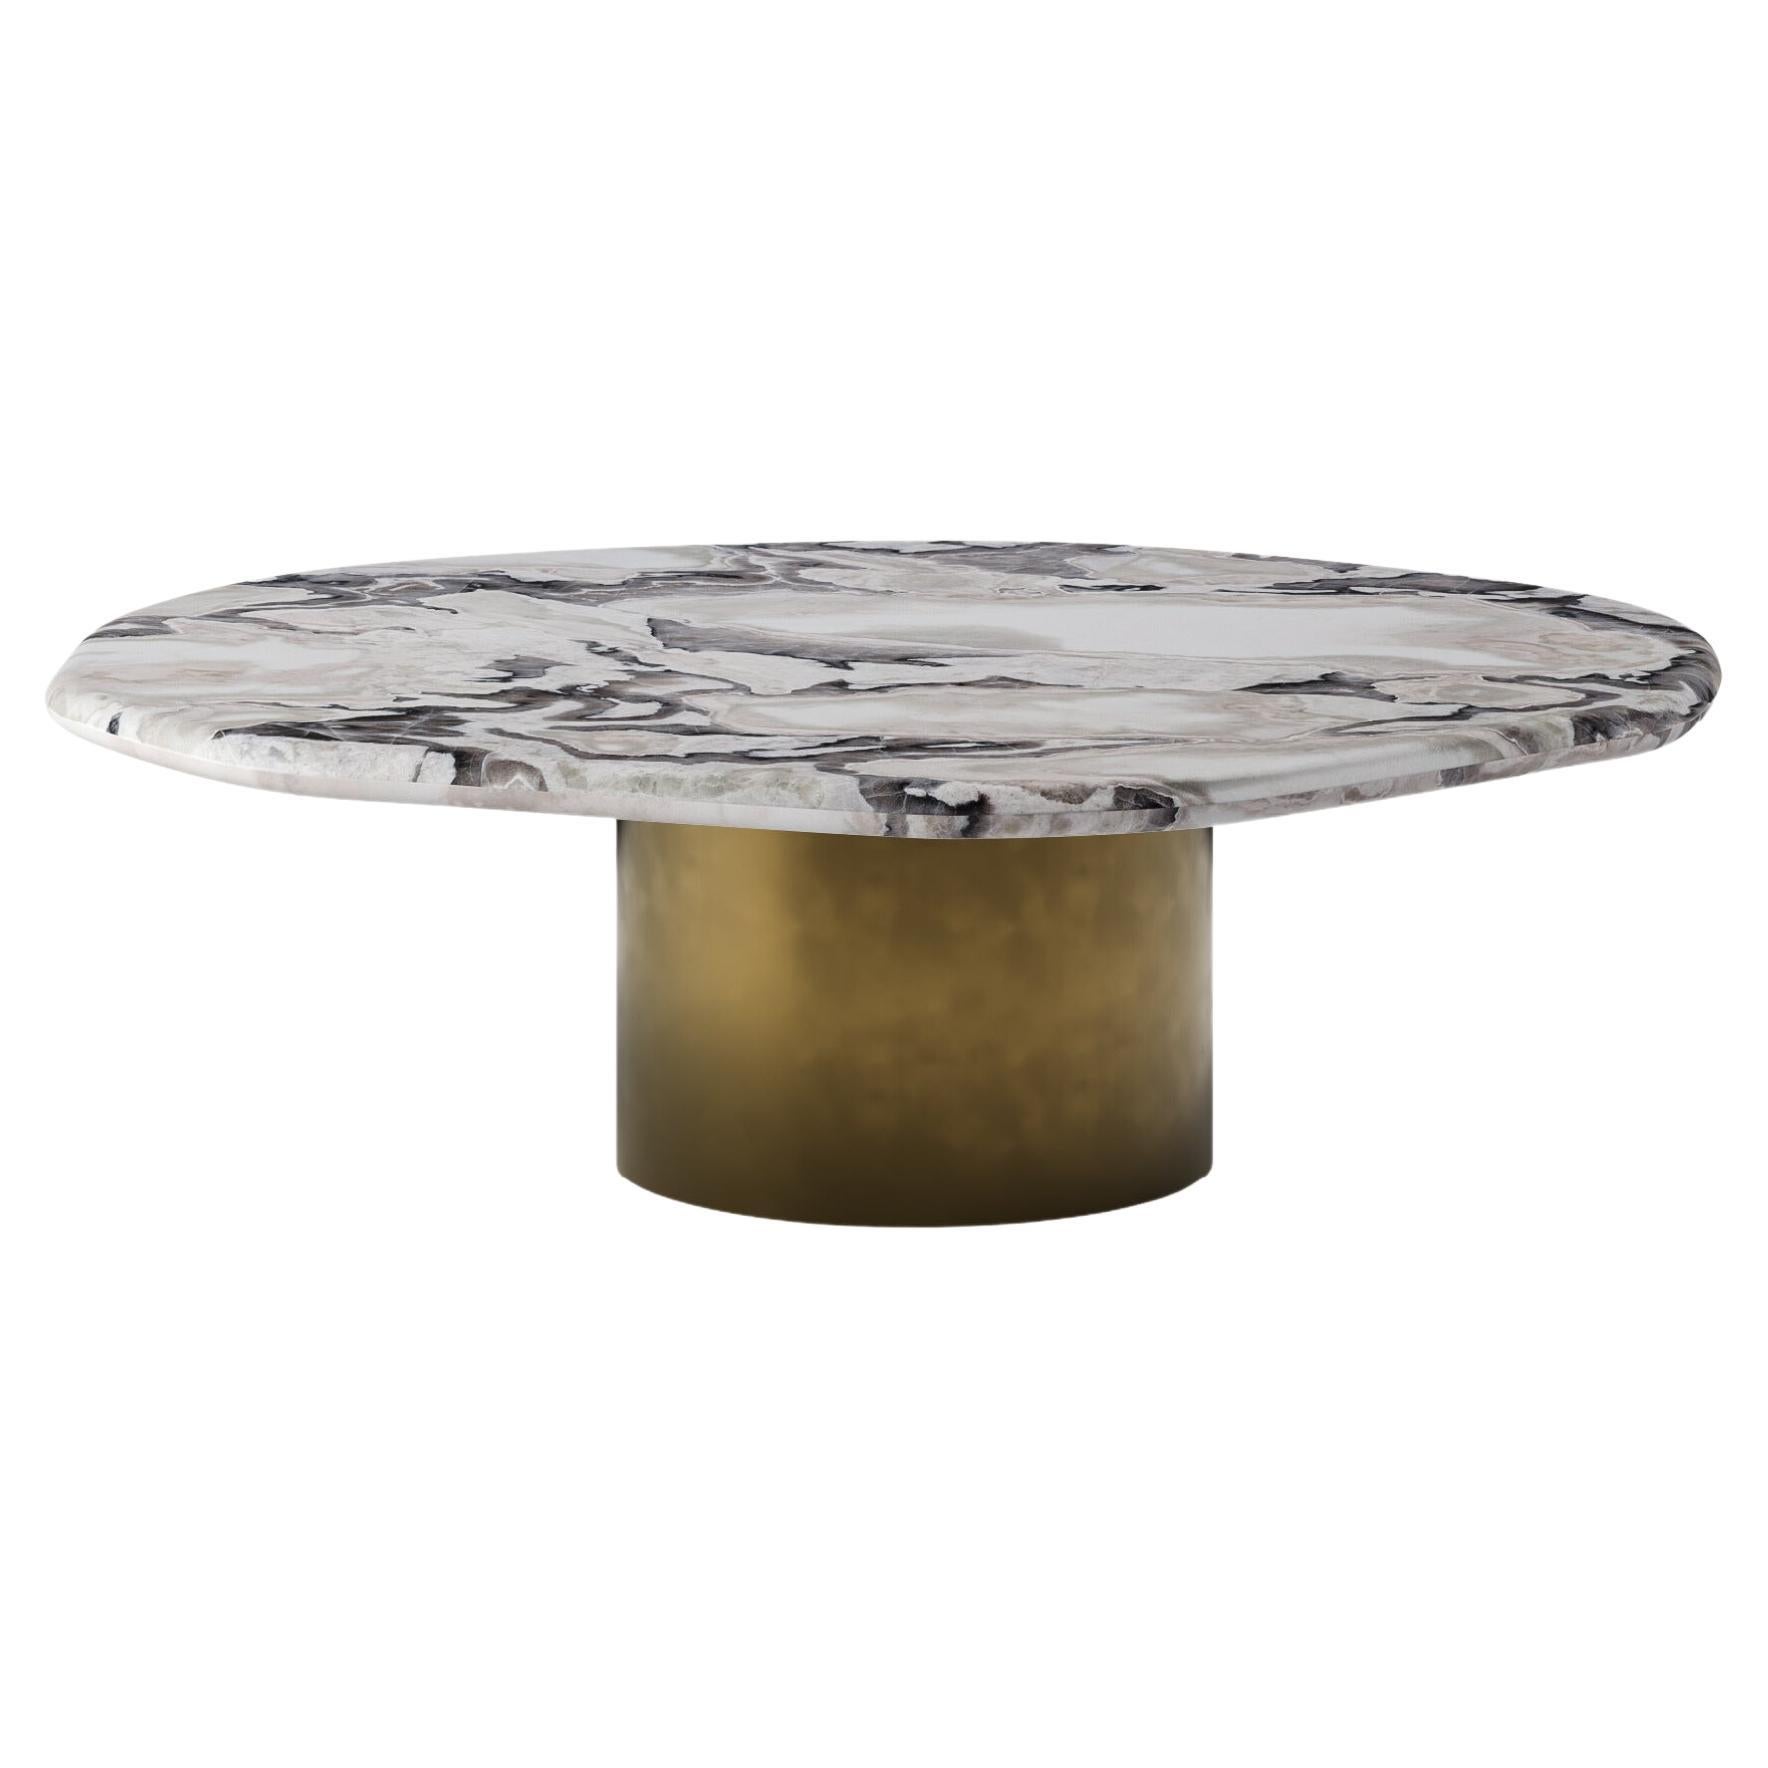 FORM(LA) Lago Round Coffee Table 48”L x 48”W x 14”H Oyster White Marble & Bronze For Sale